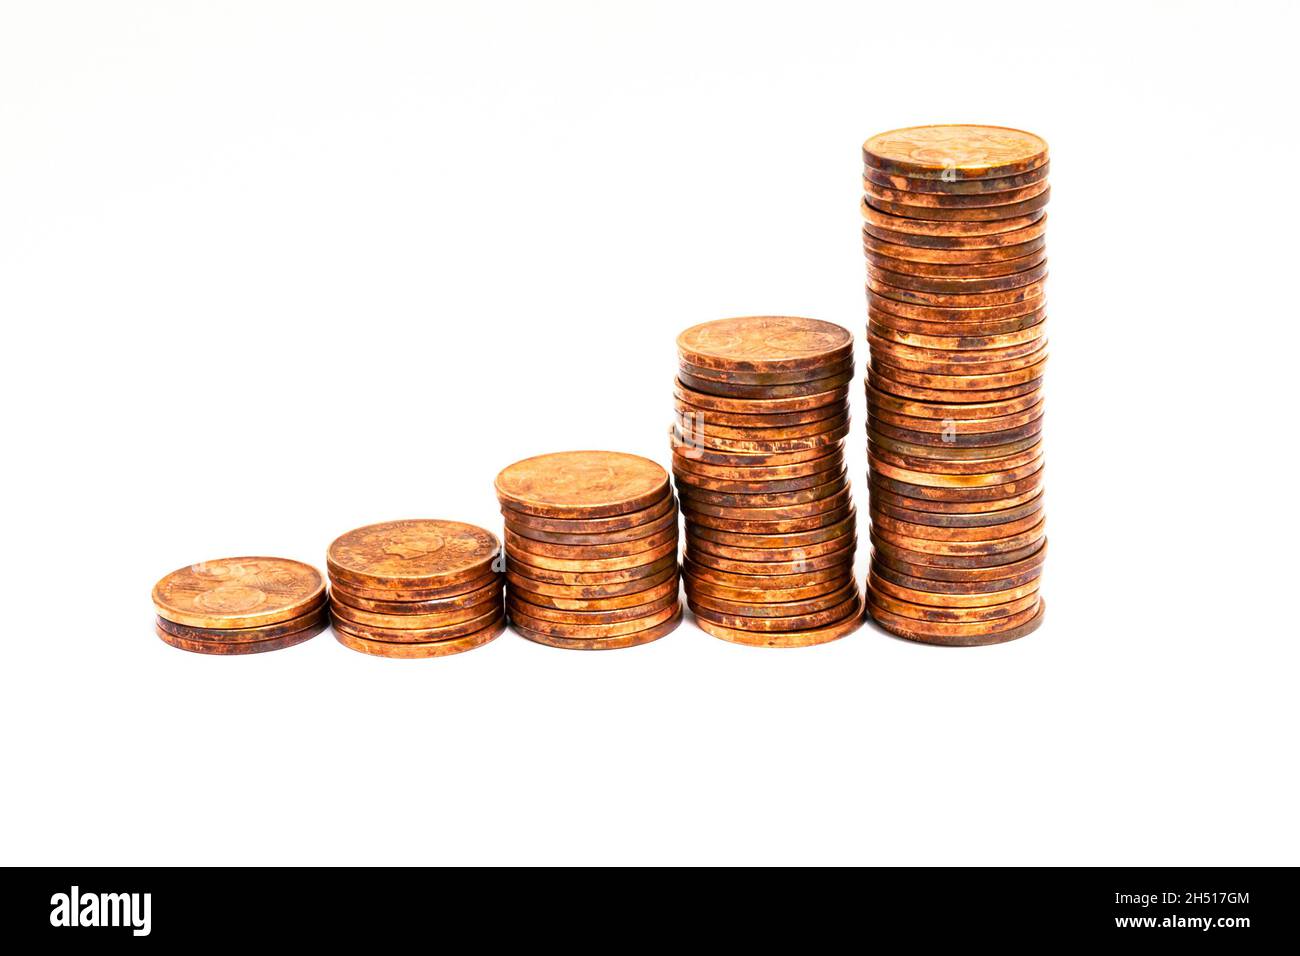 Stacks of 5 euro cent coins that gradually increase in height. Symbolic for economic growth or for inflation. Stock Photo